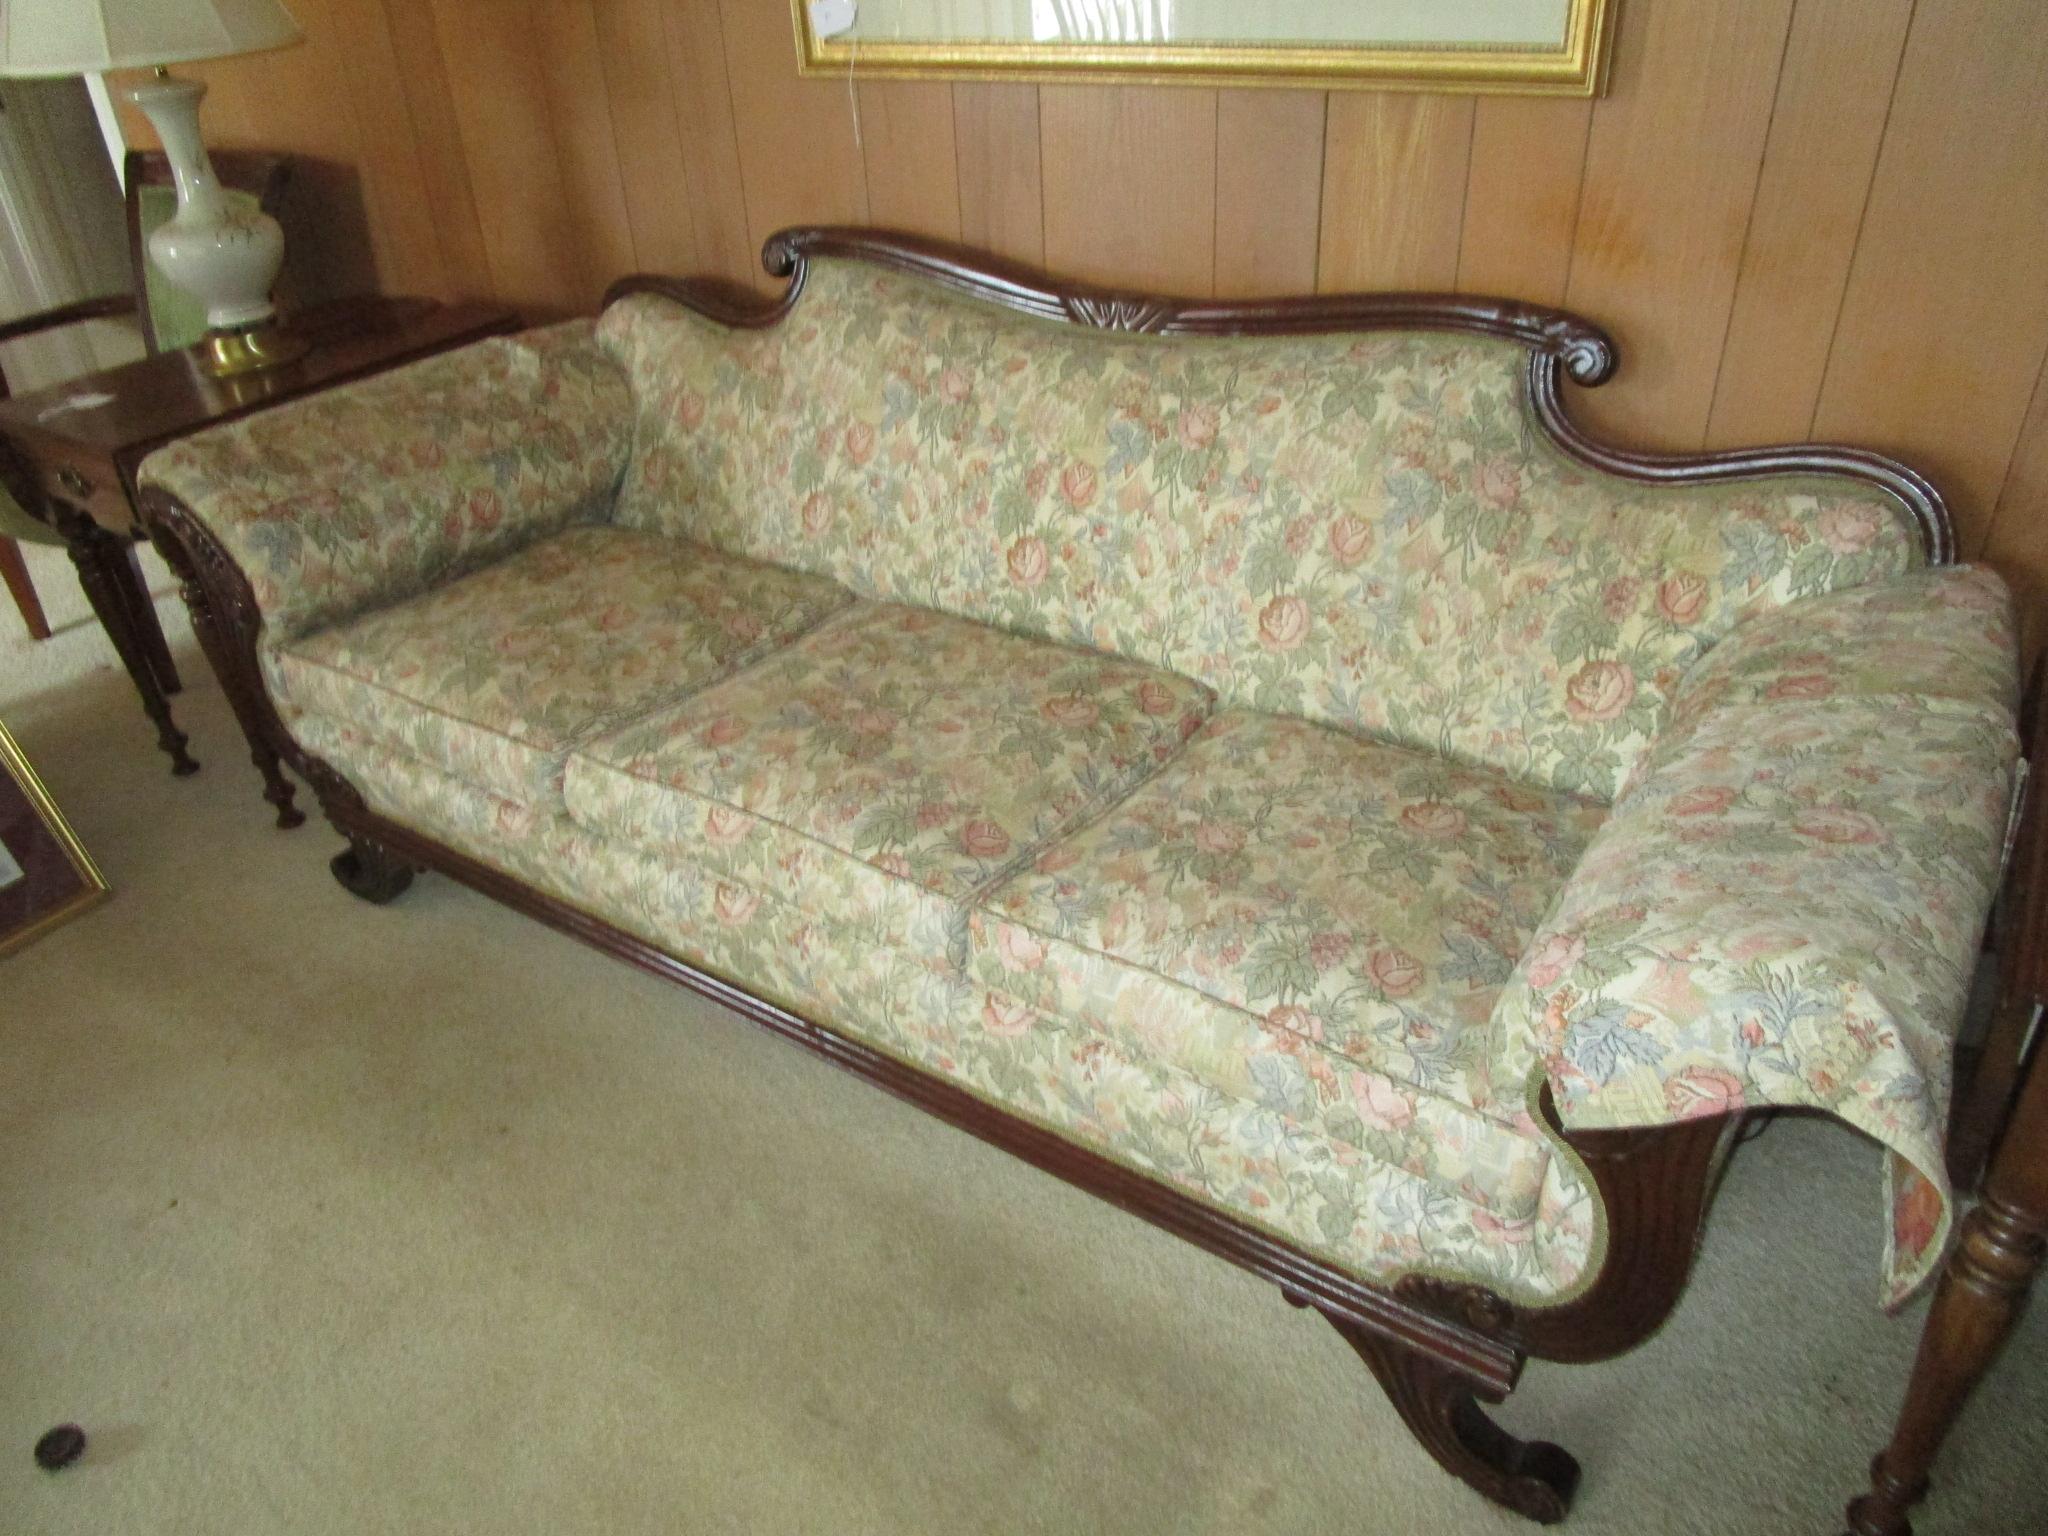 Victorian Style Sofa w/Mahogany Carved Trim & Floral Upholstery